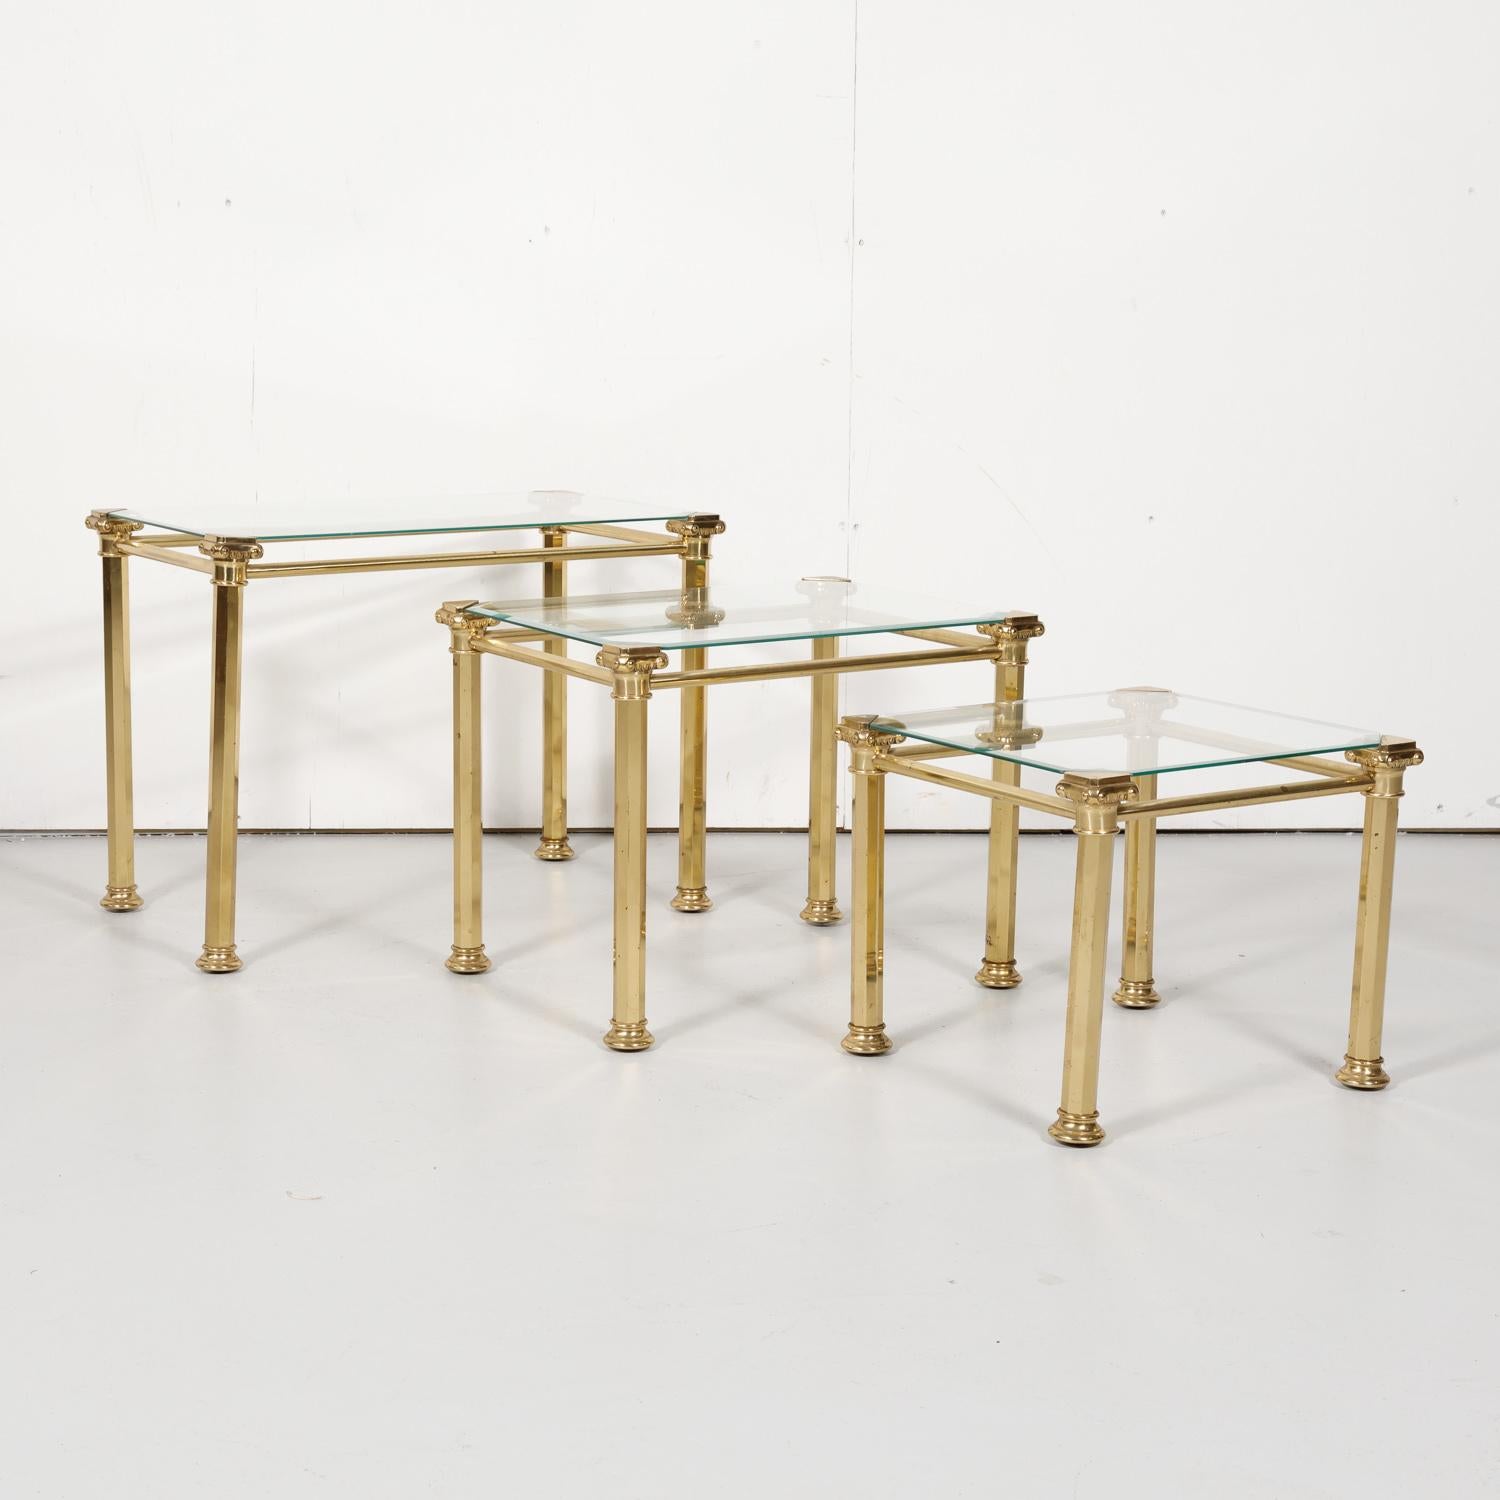 Set of Three French Mid-Century Modern Brass and Glass Nesting Tables by Maison 10